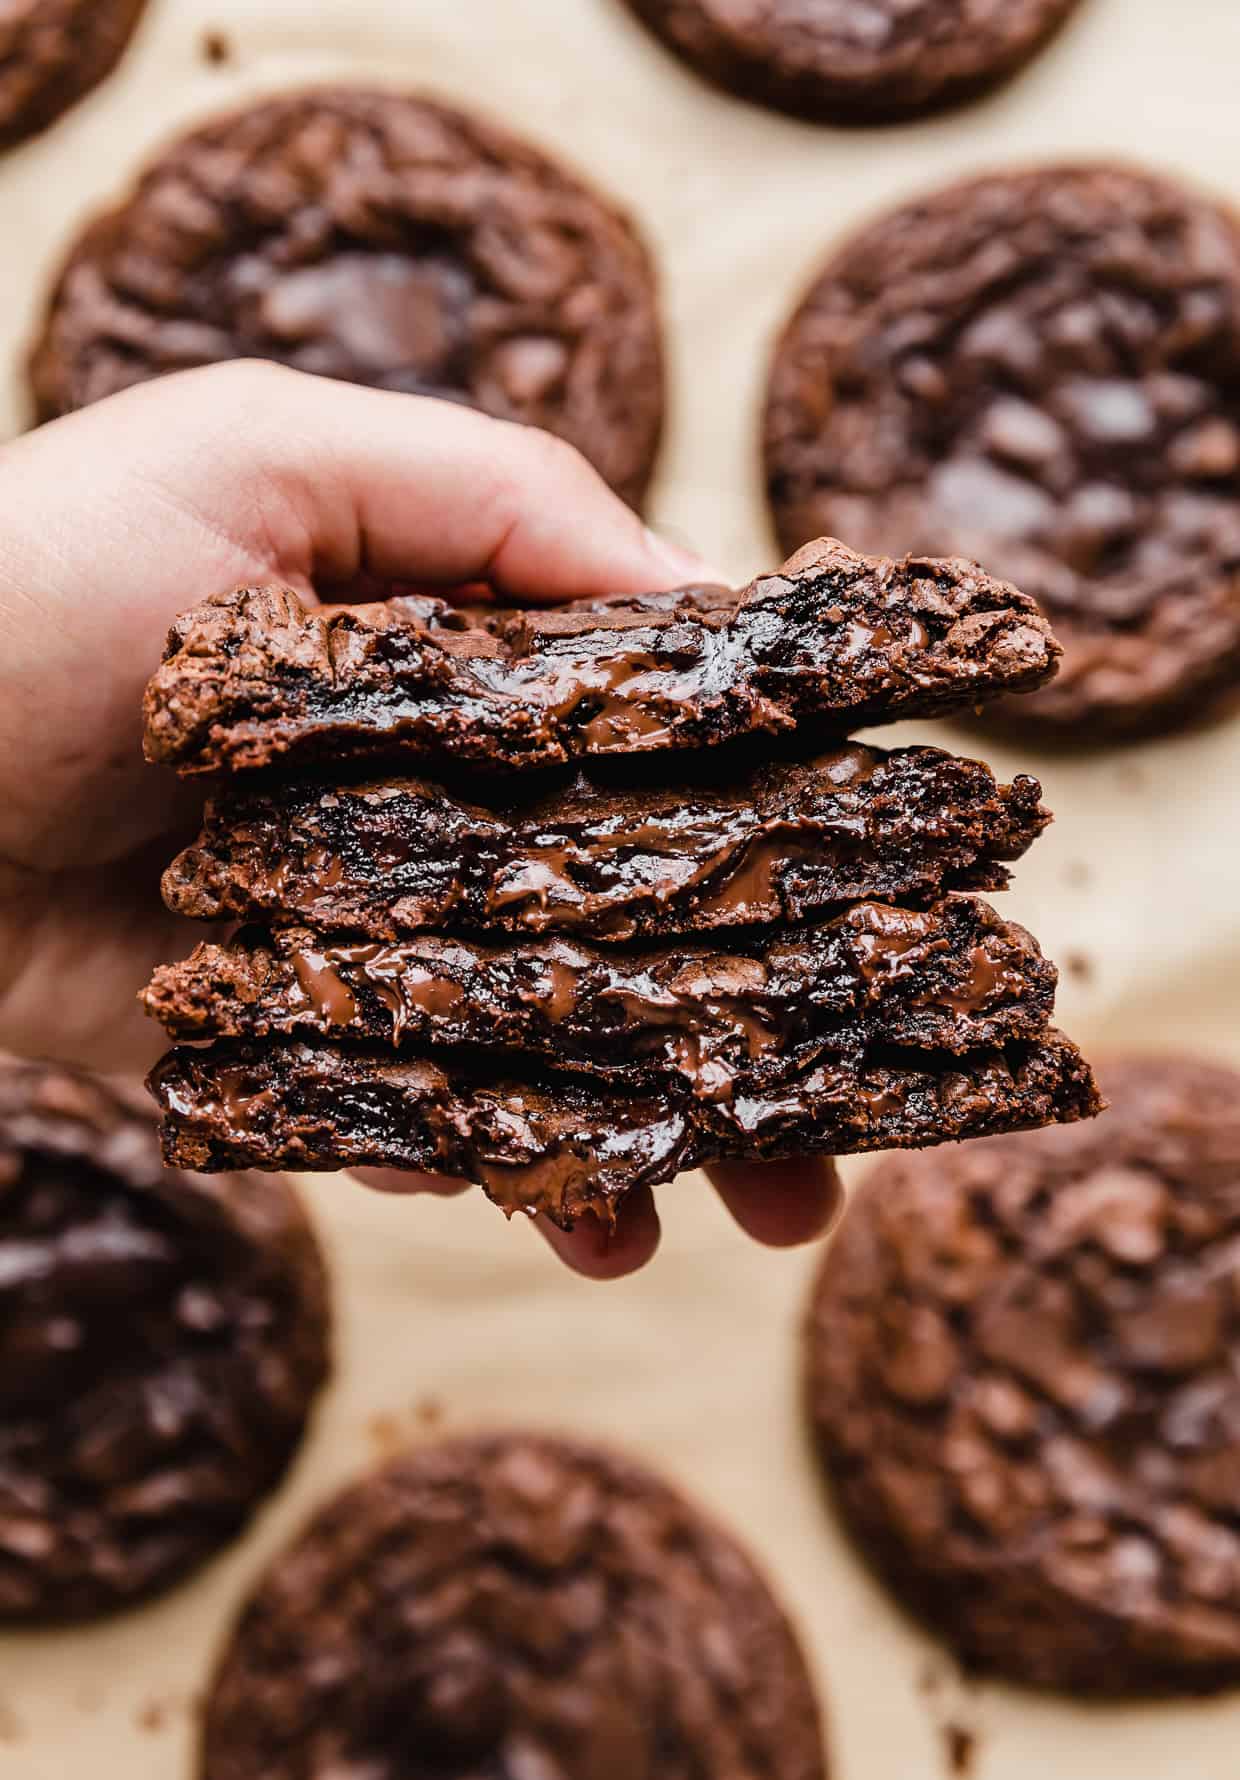 A hand holding four Crumbl Brownie Batter Cookies that have been cut in half, showcasing the inner gooeyness.